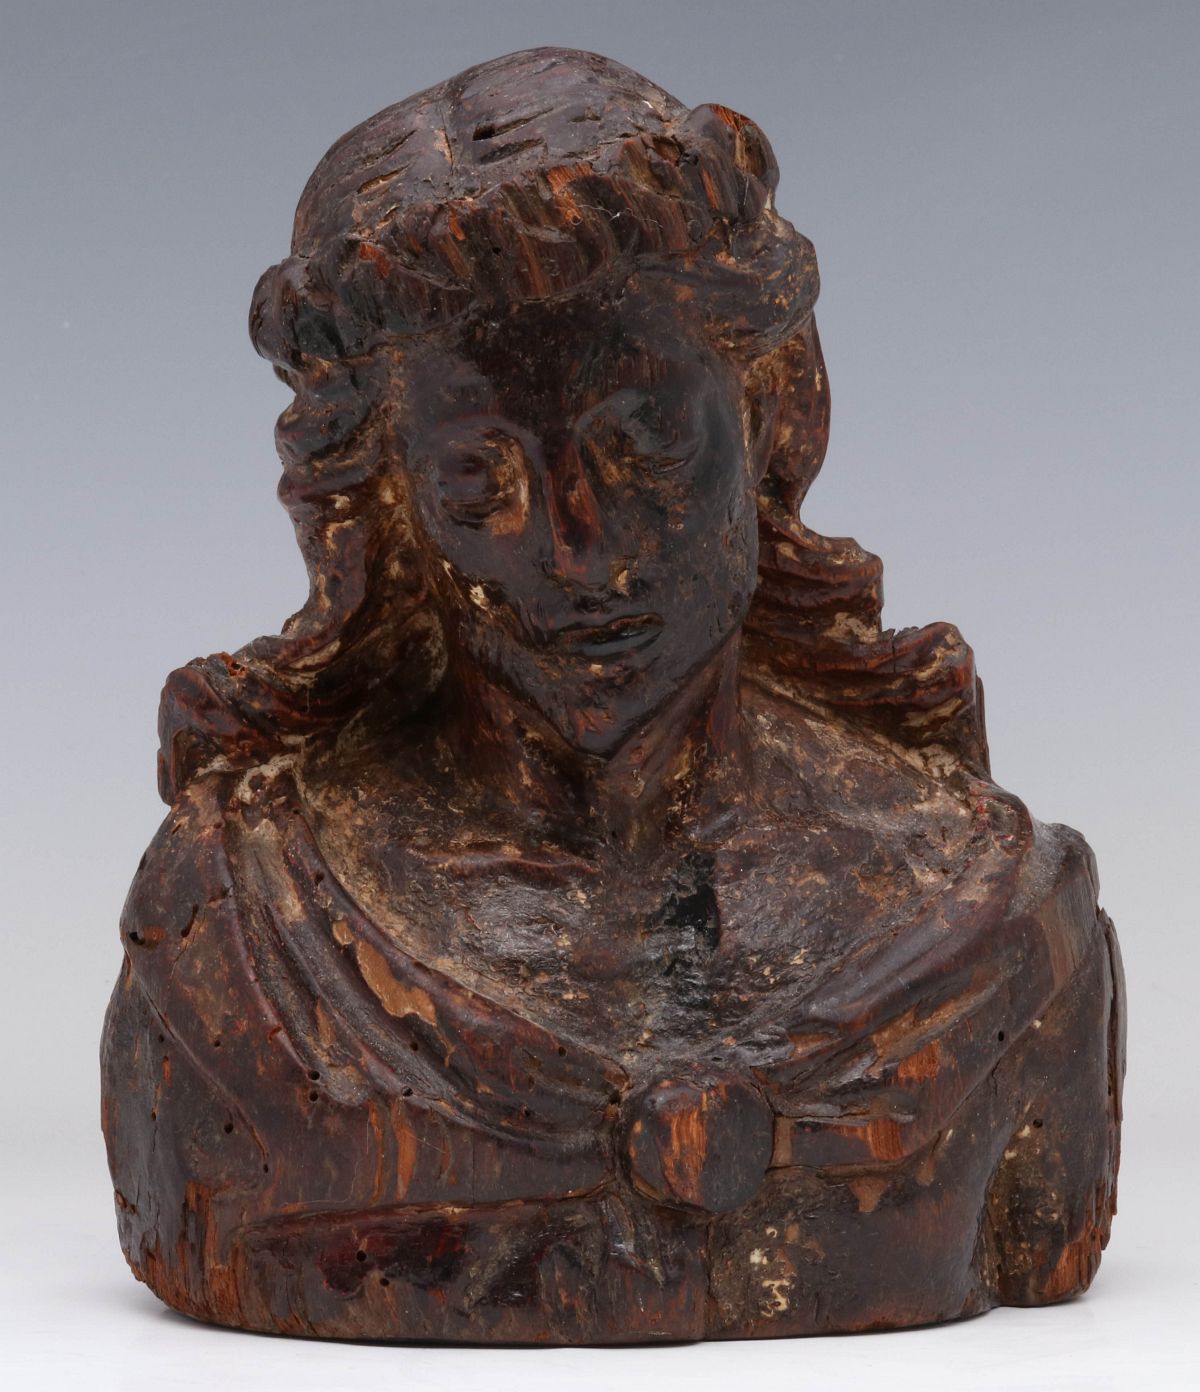 A 16TH / 17TH CENTURY CARVED WOOD BUST OF CHRIST